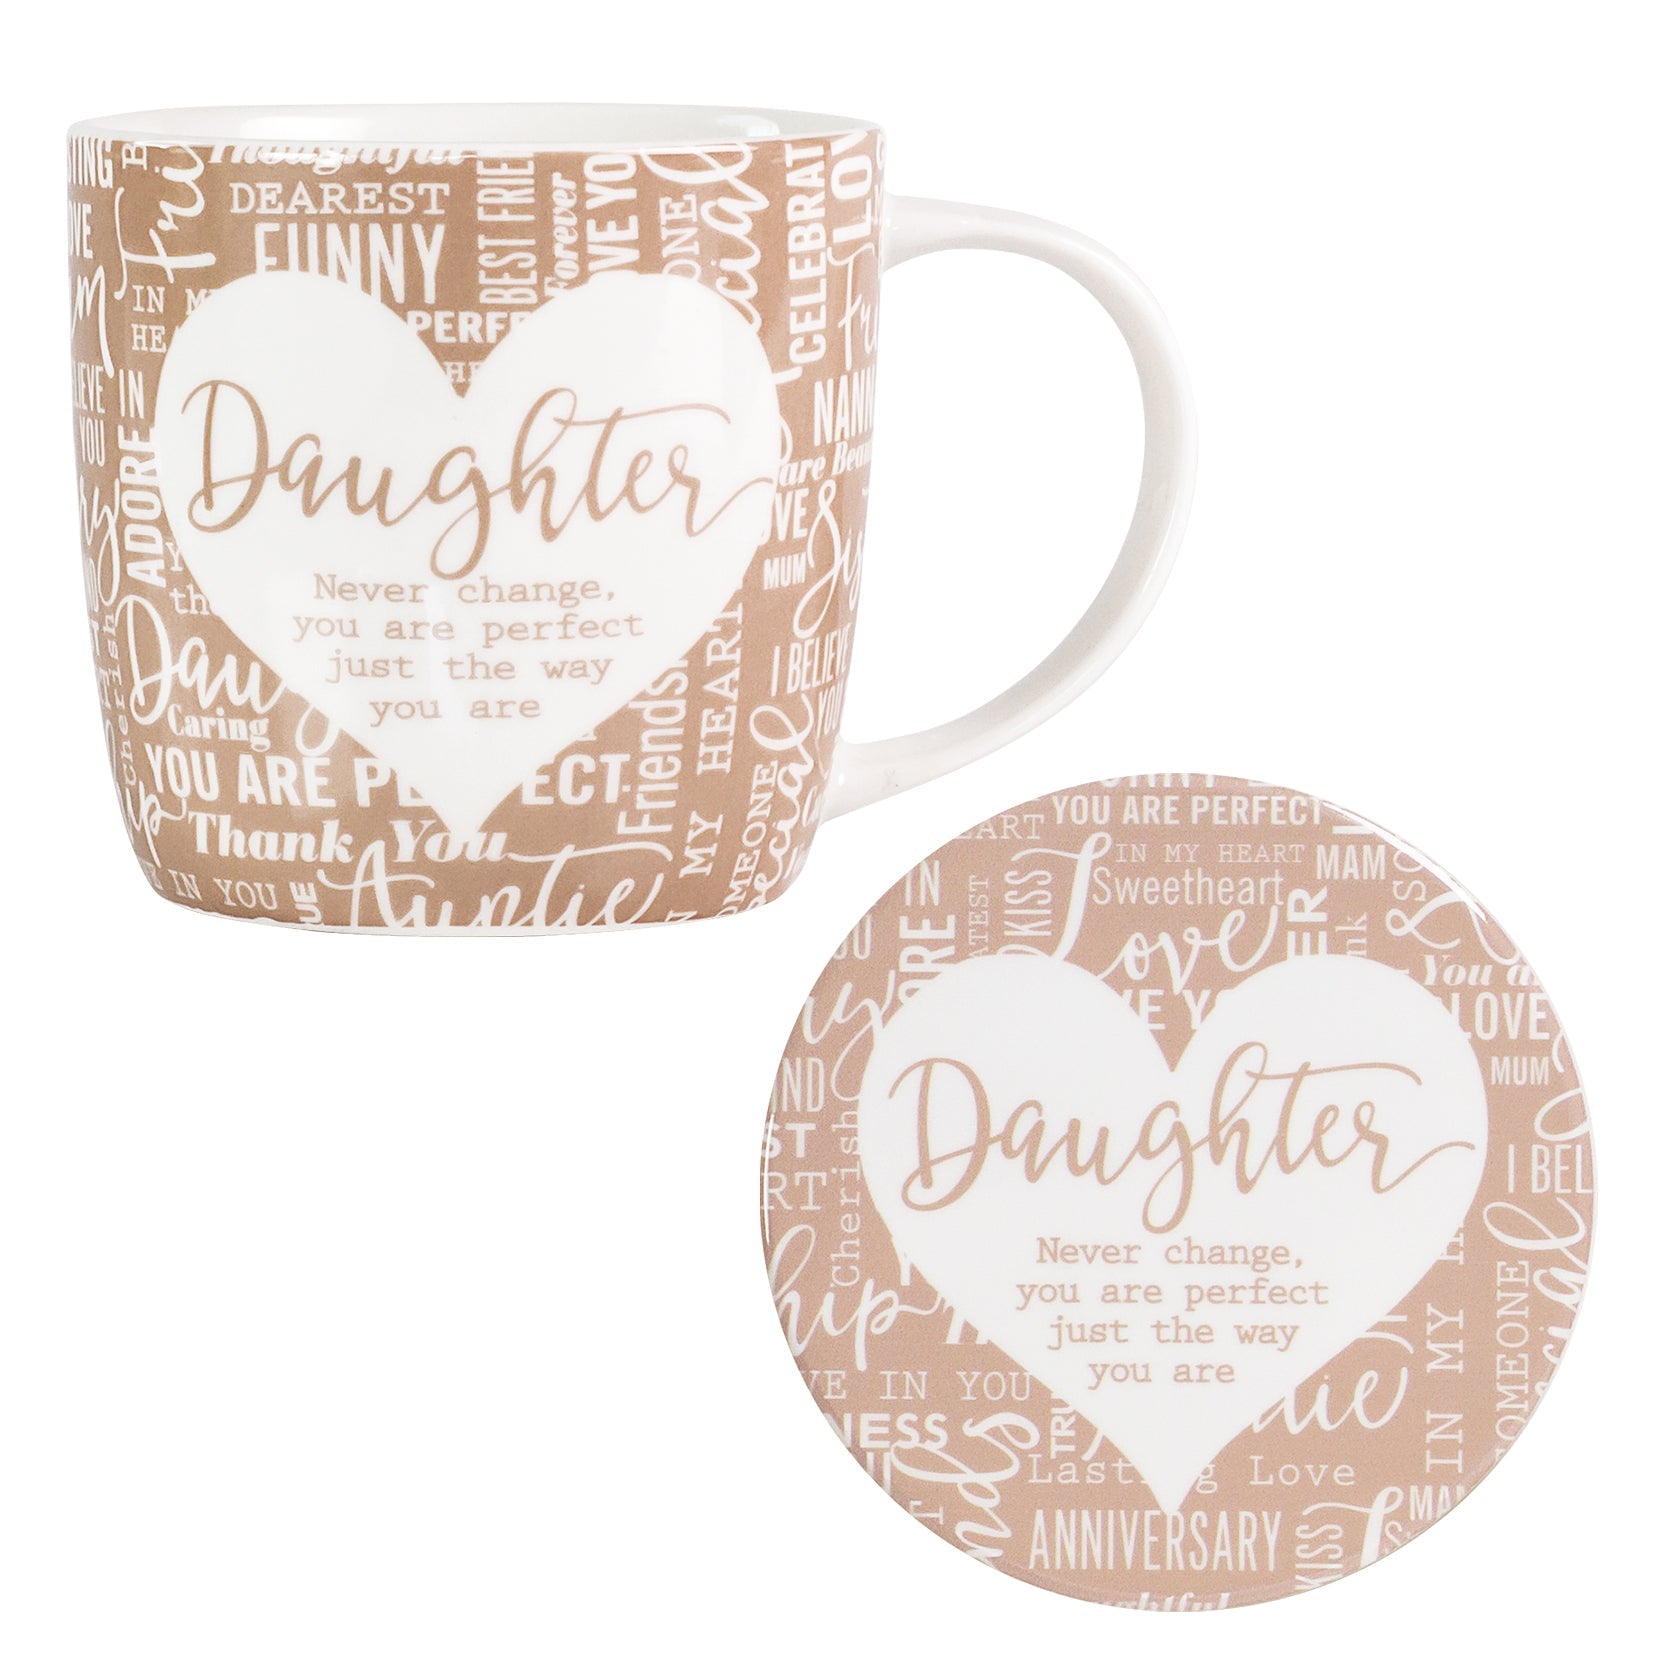 Daughter Sentiment Mug & Coaster Set - Said with Sentiment from thetraditionalgiftshop.com